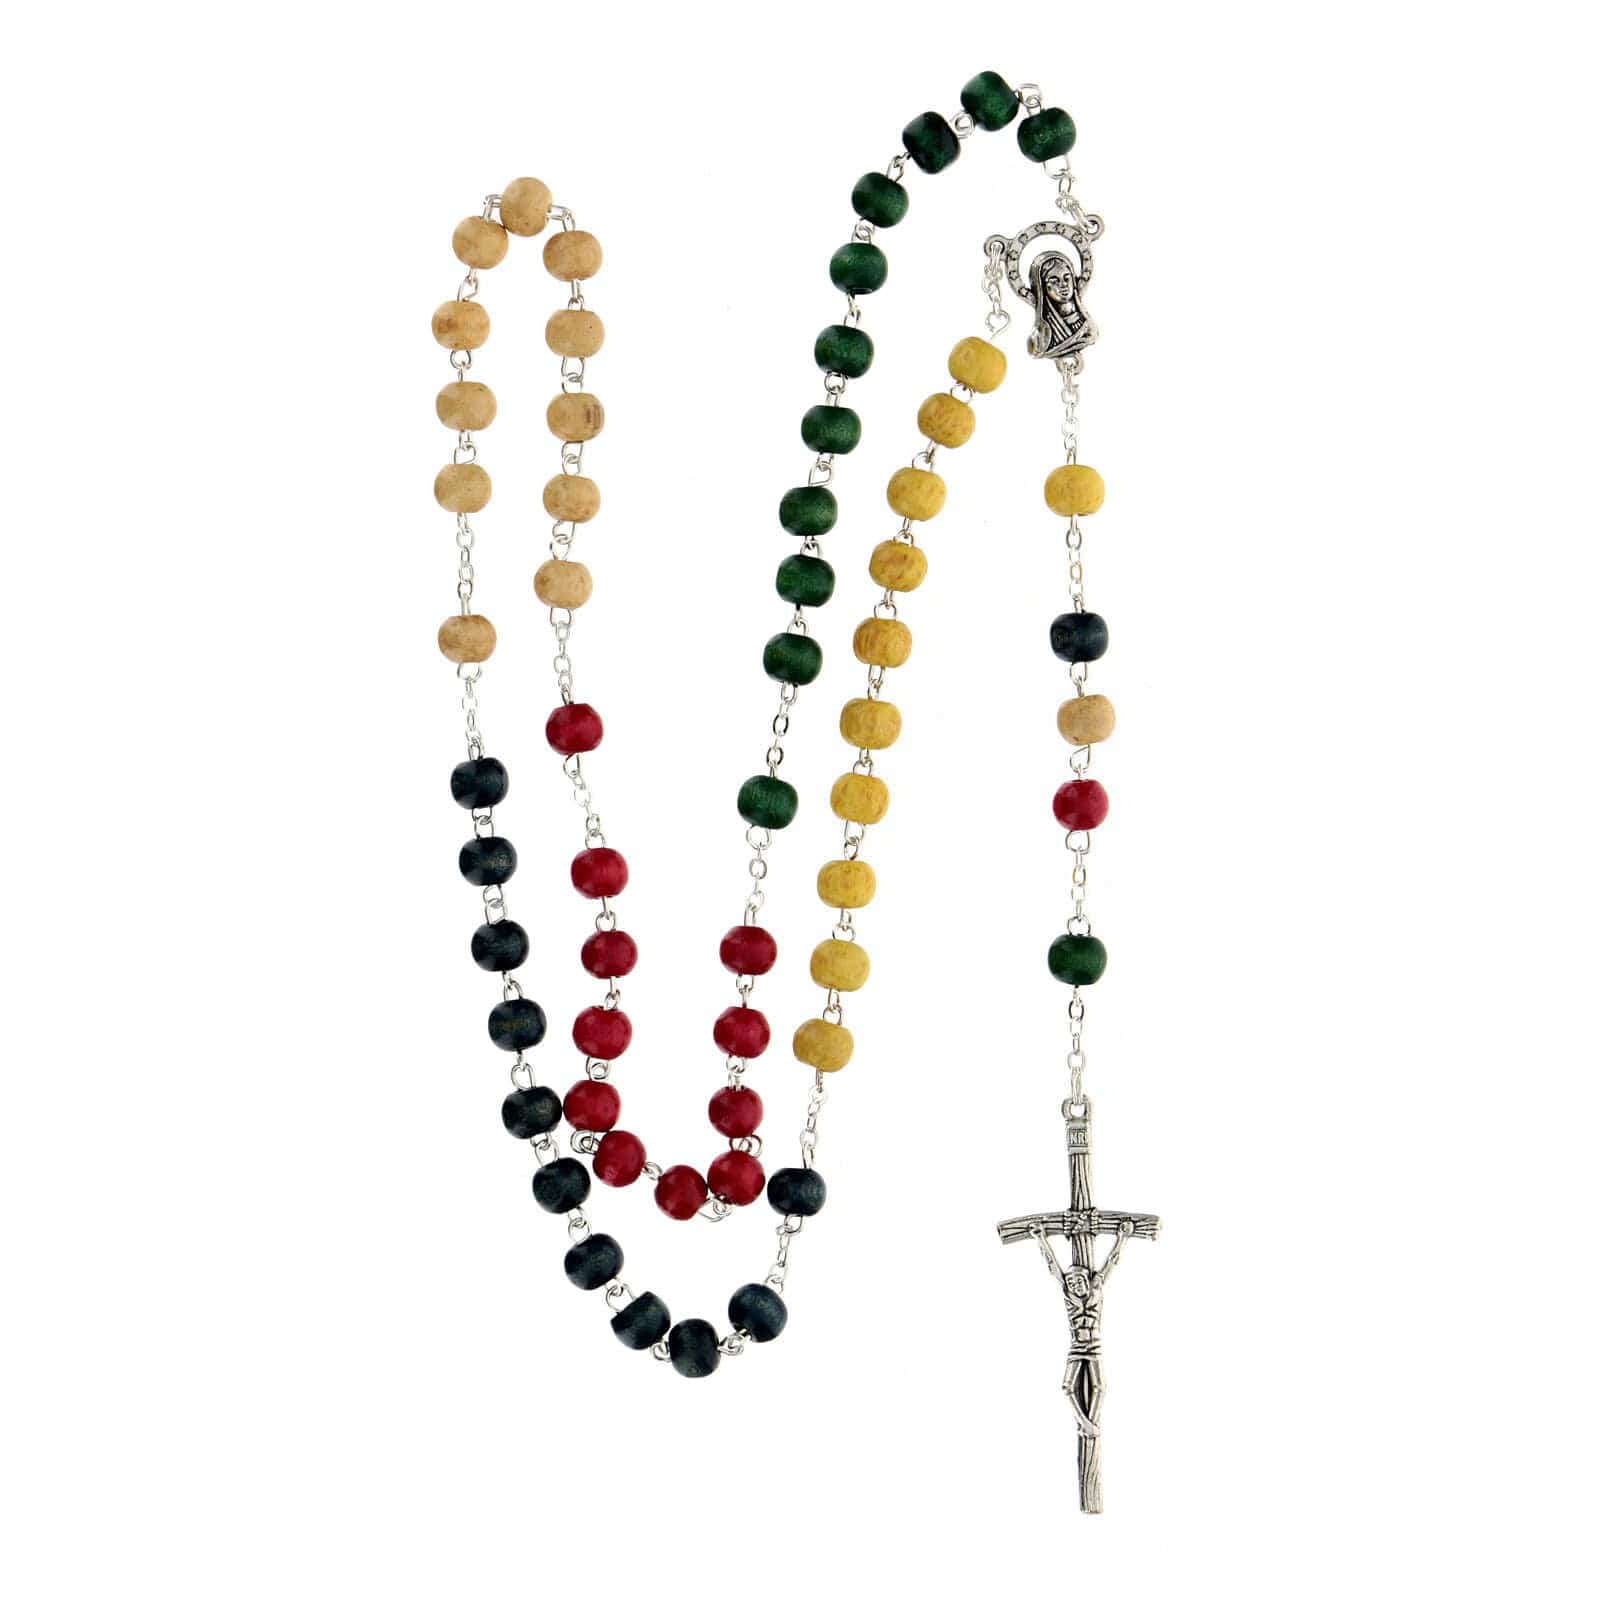 Catholically Rosaries World Mission Catholic - Missionary Wooden Rosary Beads - Blessed By Pope